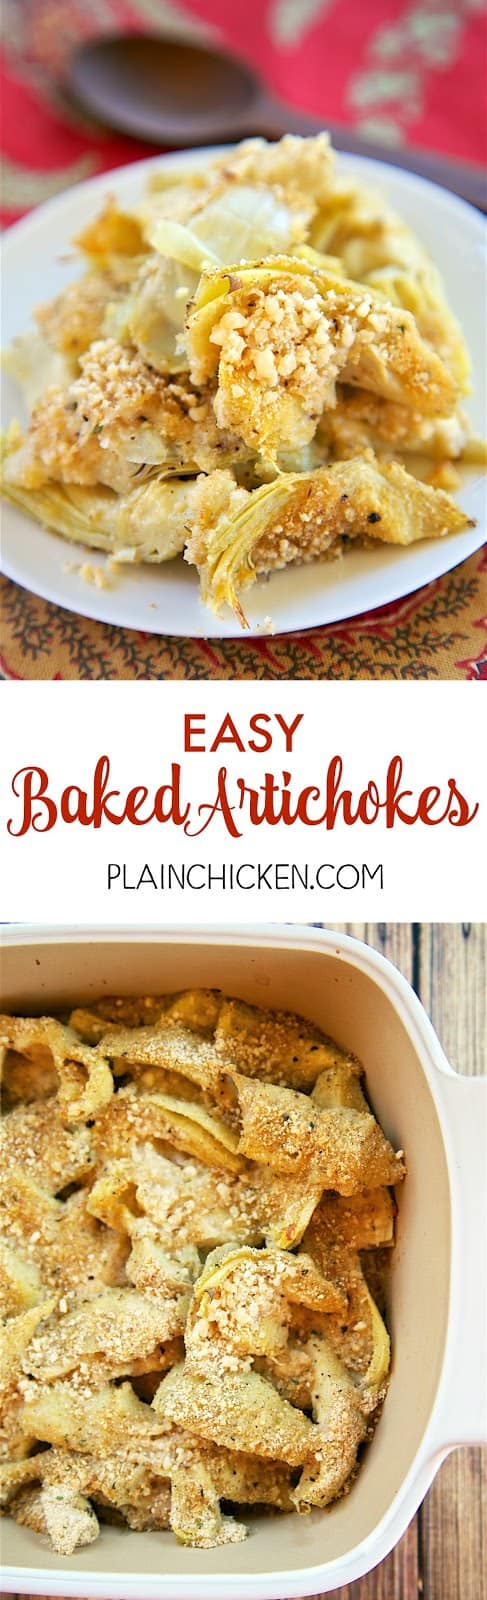 Easy Baked Artichokes - SO good and SOOO easy!!! All the flavors of stuffed artichokes without all the work. Canned artichokes, olive oil, garlic, bread crumbs and parmesan cheese. Only takes a minute to make! Great with steak, chicken pork and even pasta! LOVE quick and easy side dish recipes!